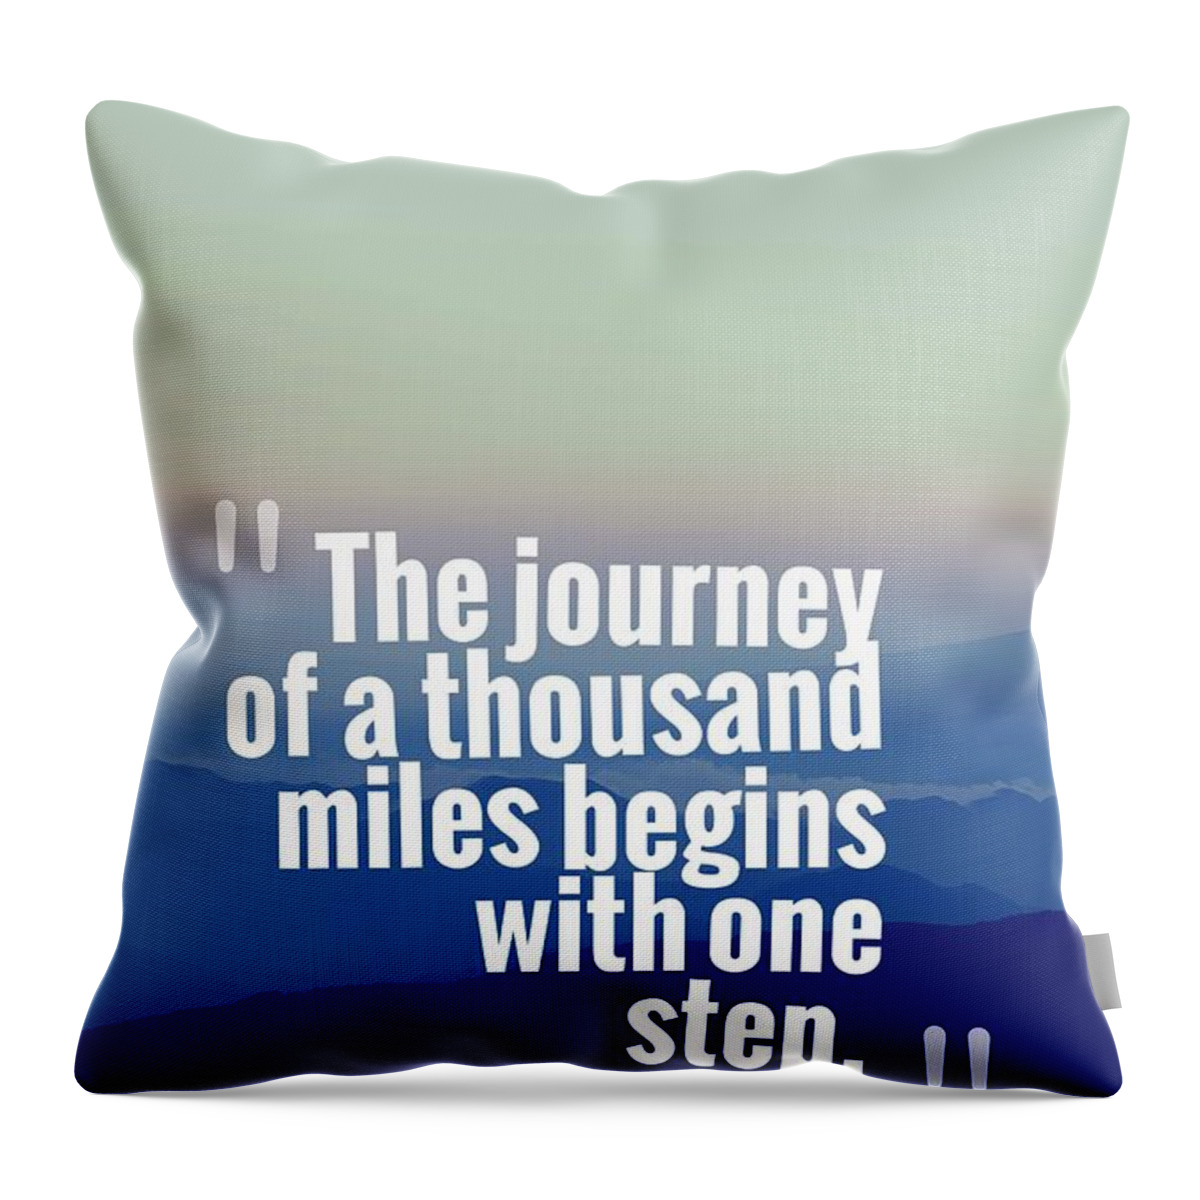 Motivational Throw Pillow featuring the painting Inspirational Timeless Quotes - Lao Tzu by Celestial Images